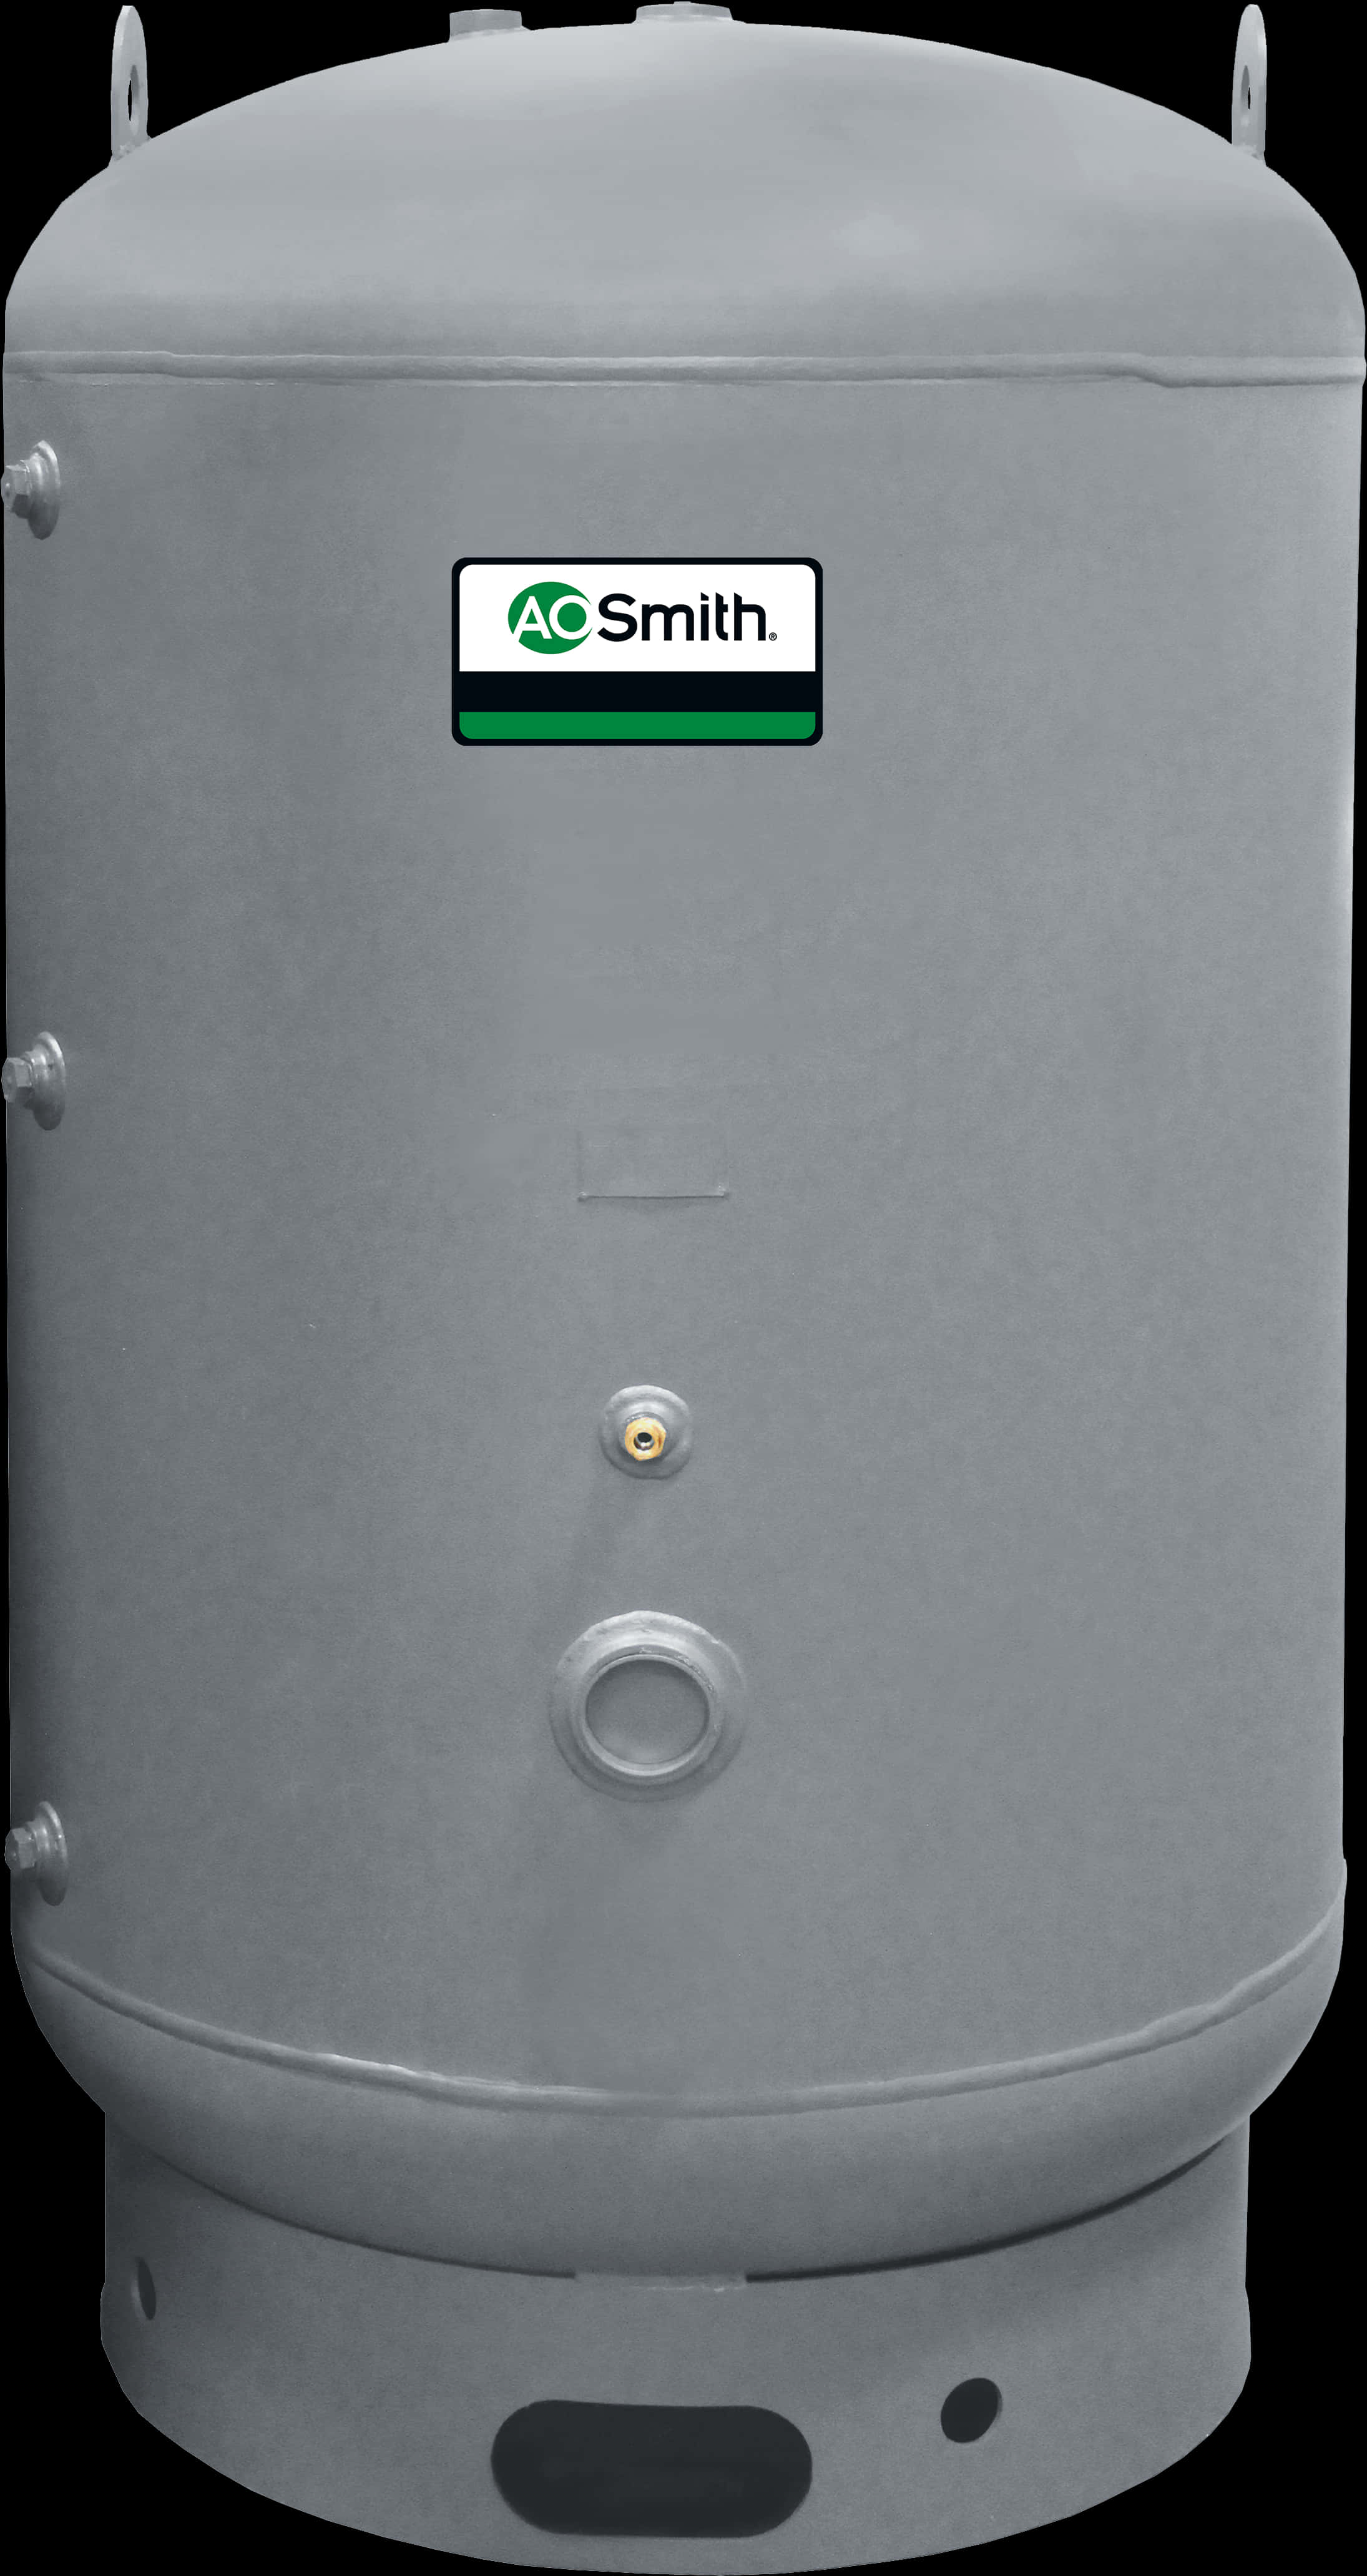 Ac Smith Hot Water Tank